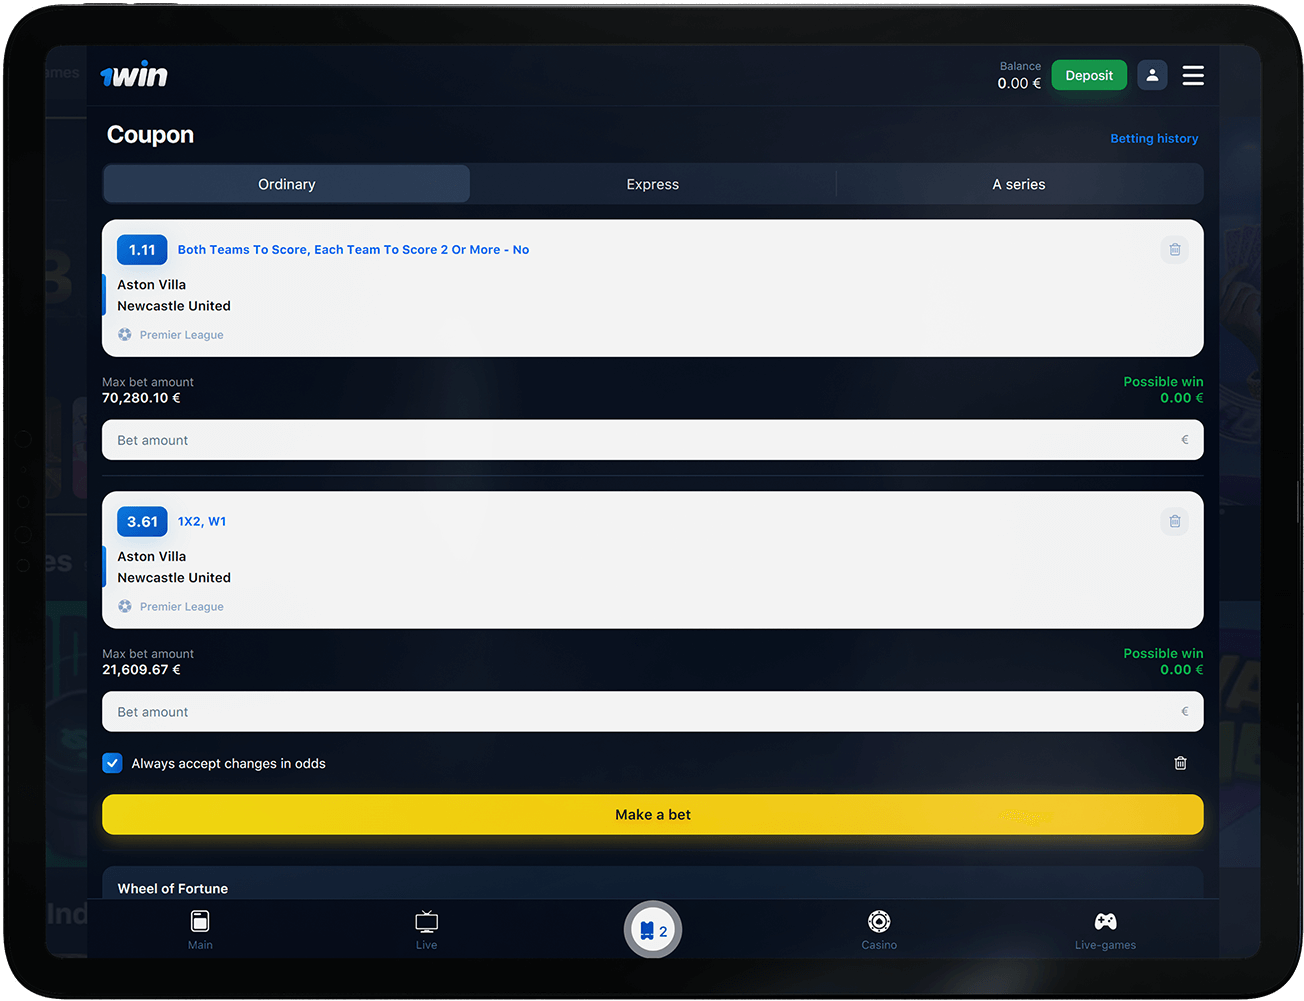 How to make a bet at 1Win, Step 5: Select bets and confirm